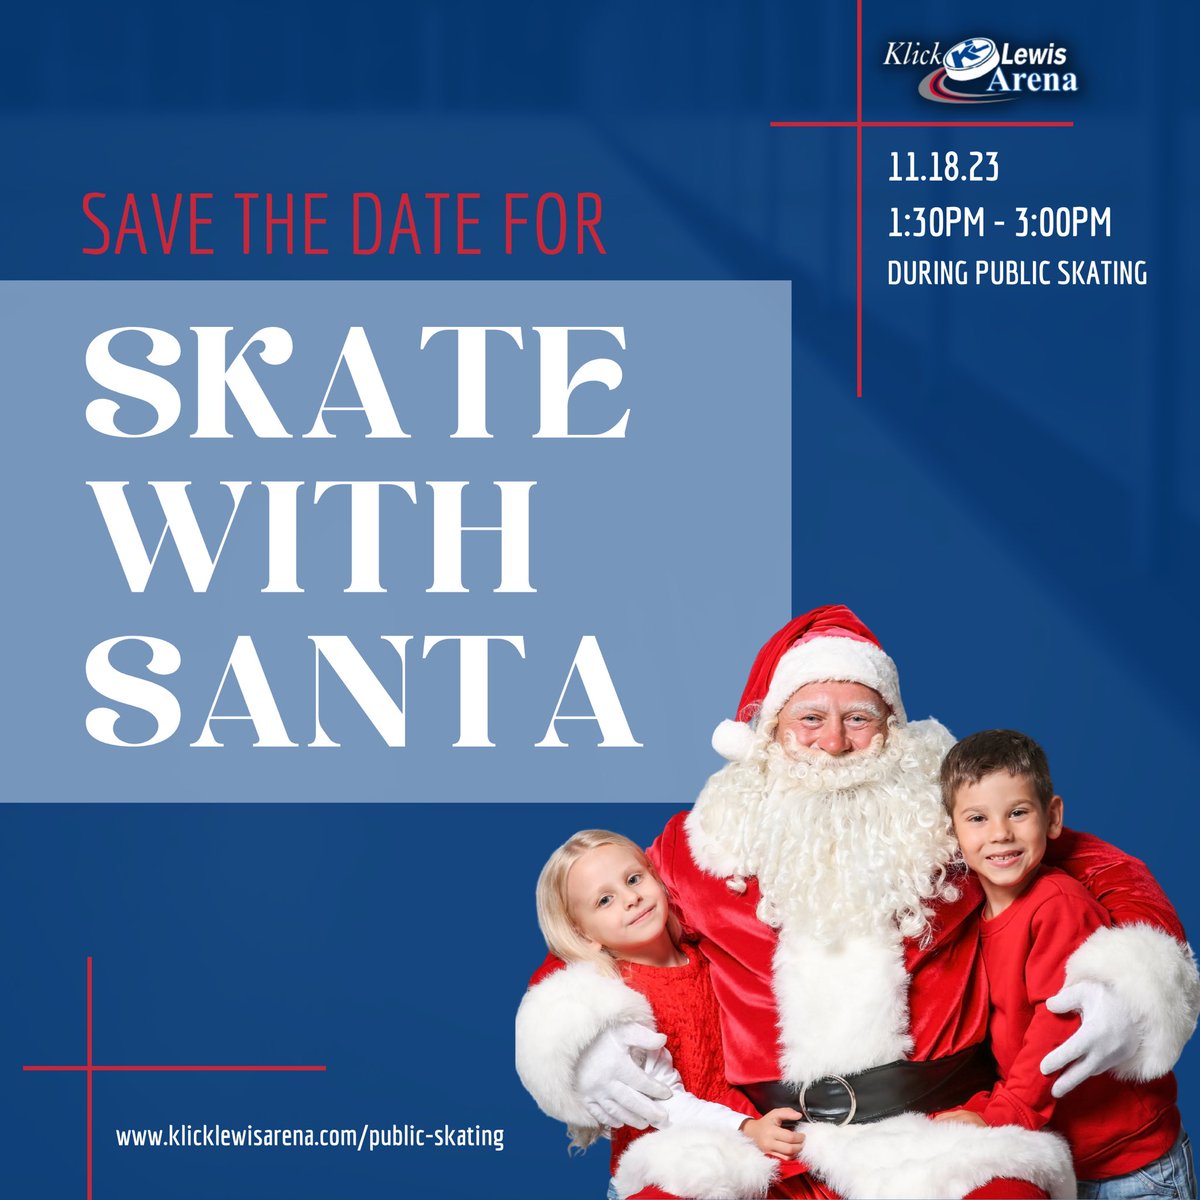 🎅🏼Santa's coming to town, and he's bringing the skates! Mark your calendars and join us for special public skating session with Santa Claus. It's the most wonderful time to glide on ice and make holiday memories! #SkateWithSanta #HolidayCheer